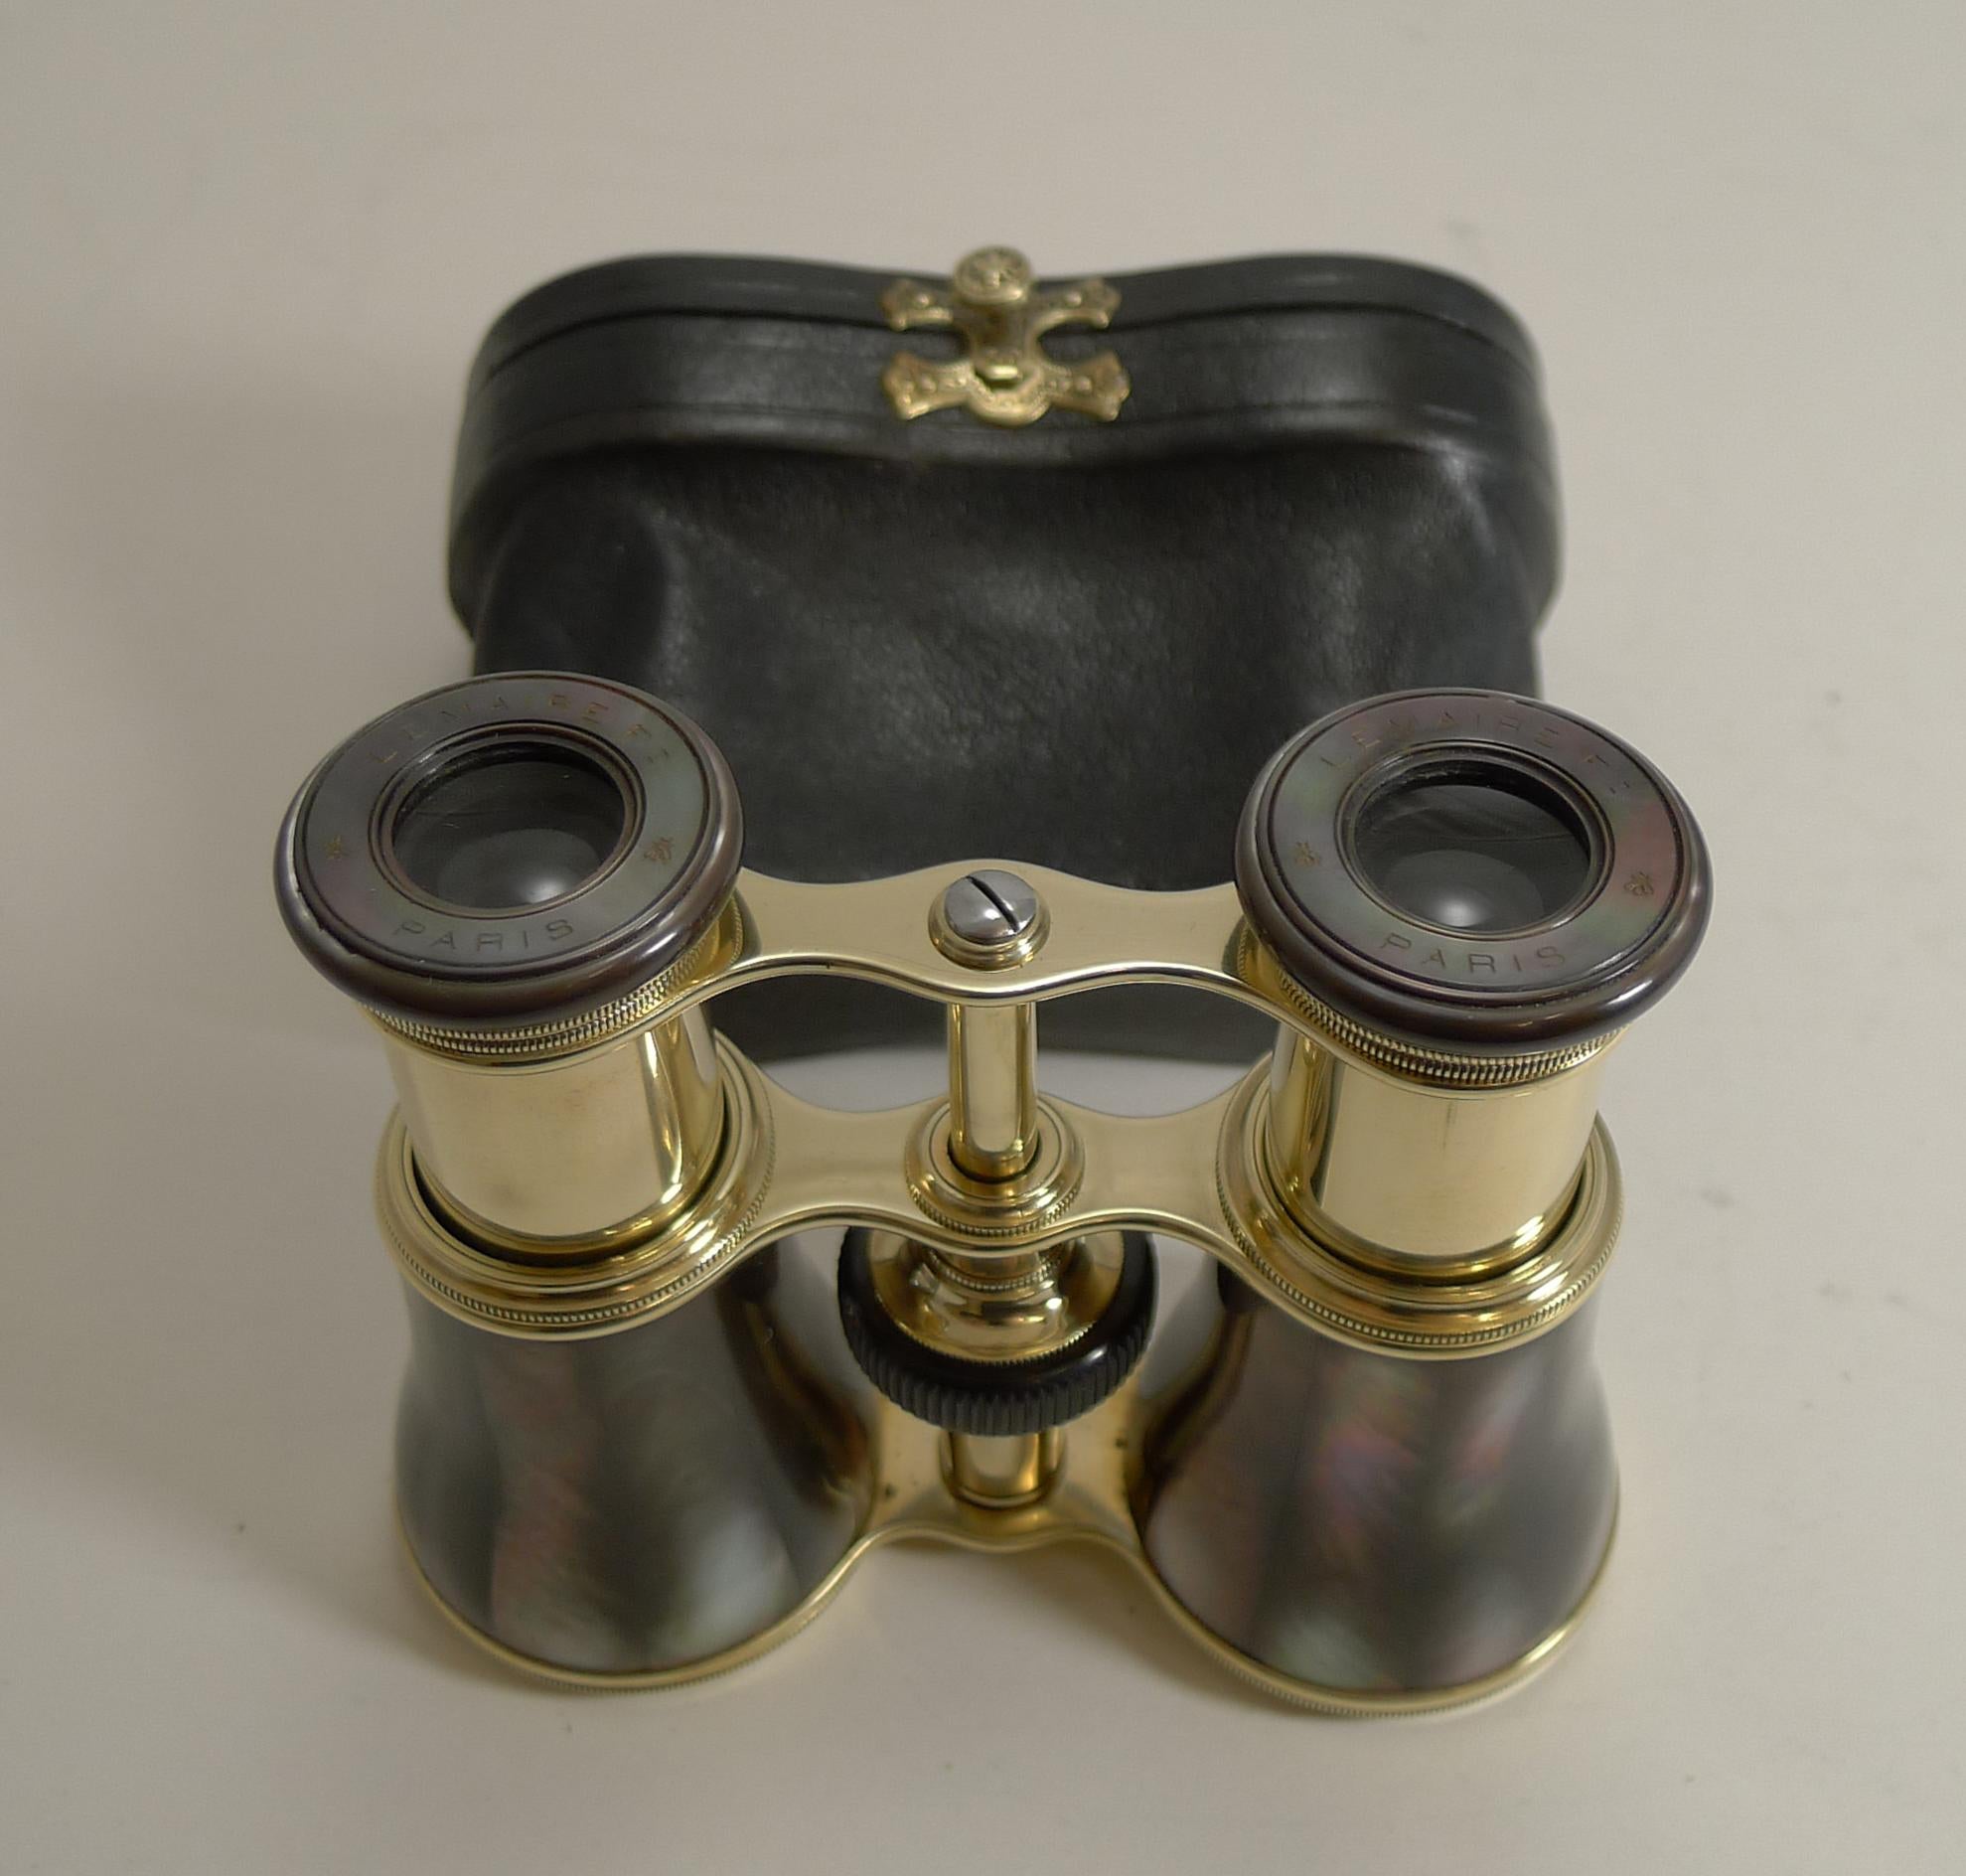 A truly exquisite pair of Opera Glasses by the top-notch maker, LeMaire of Paris, signed on both eye pieces with the two engraved tiny bee motifs, used by LeMaire.

The glasses are made from polished brass and Abalone shell with it's rich colour and